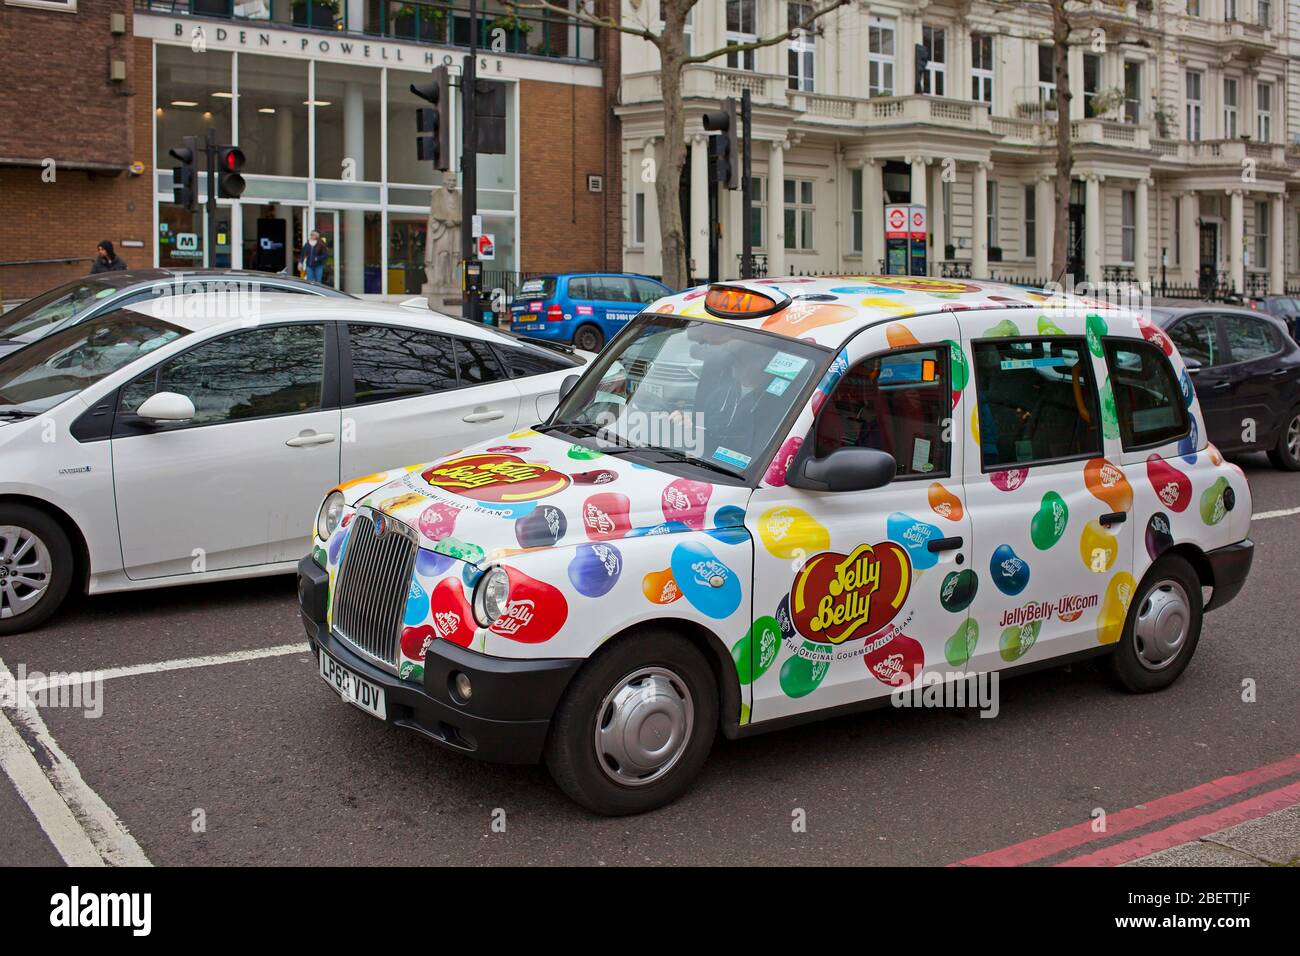 Jelly Belly jelly beans livery on a London taxi Stock Photo